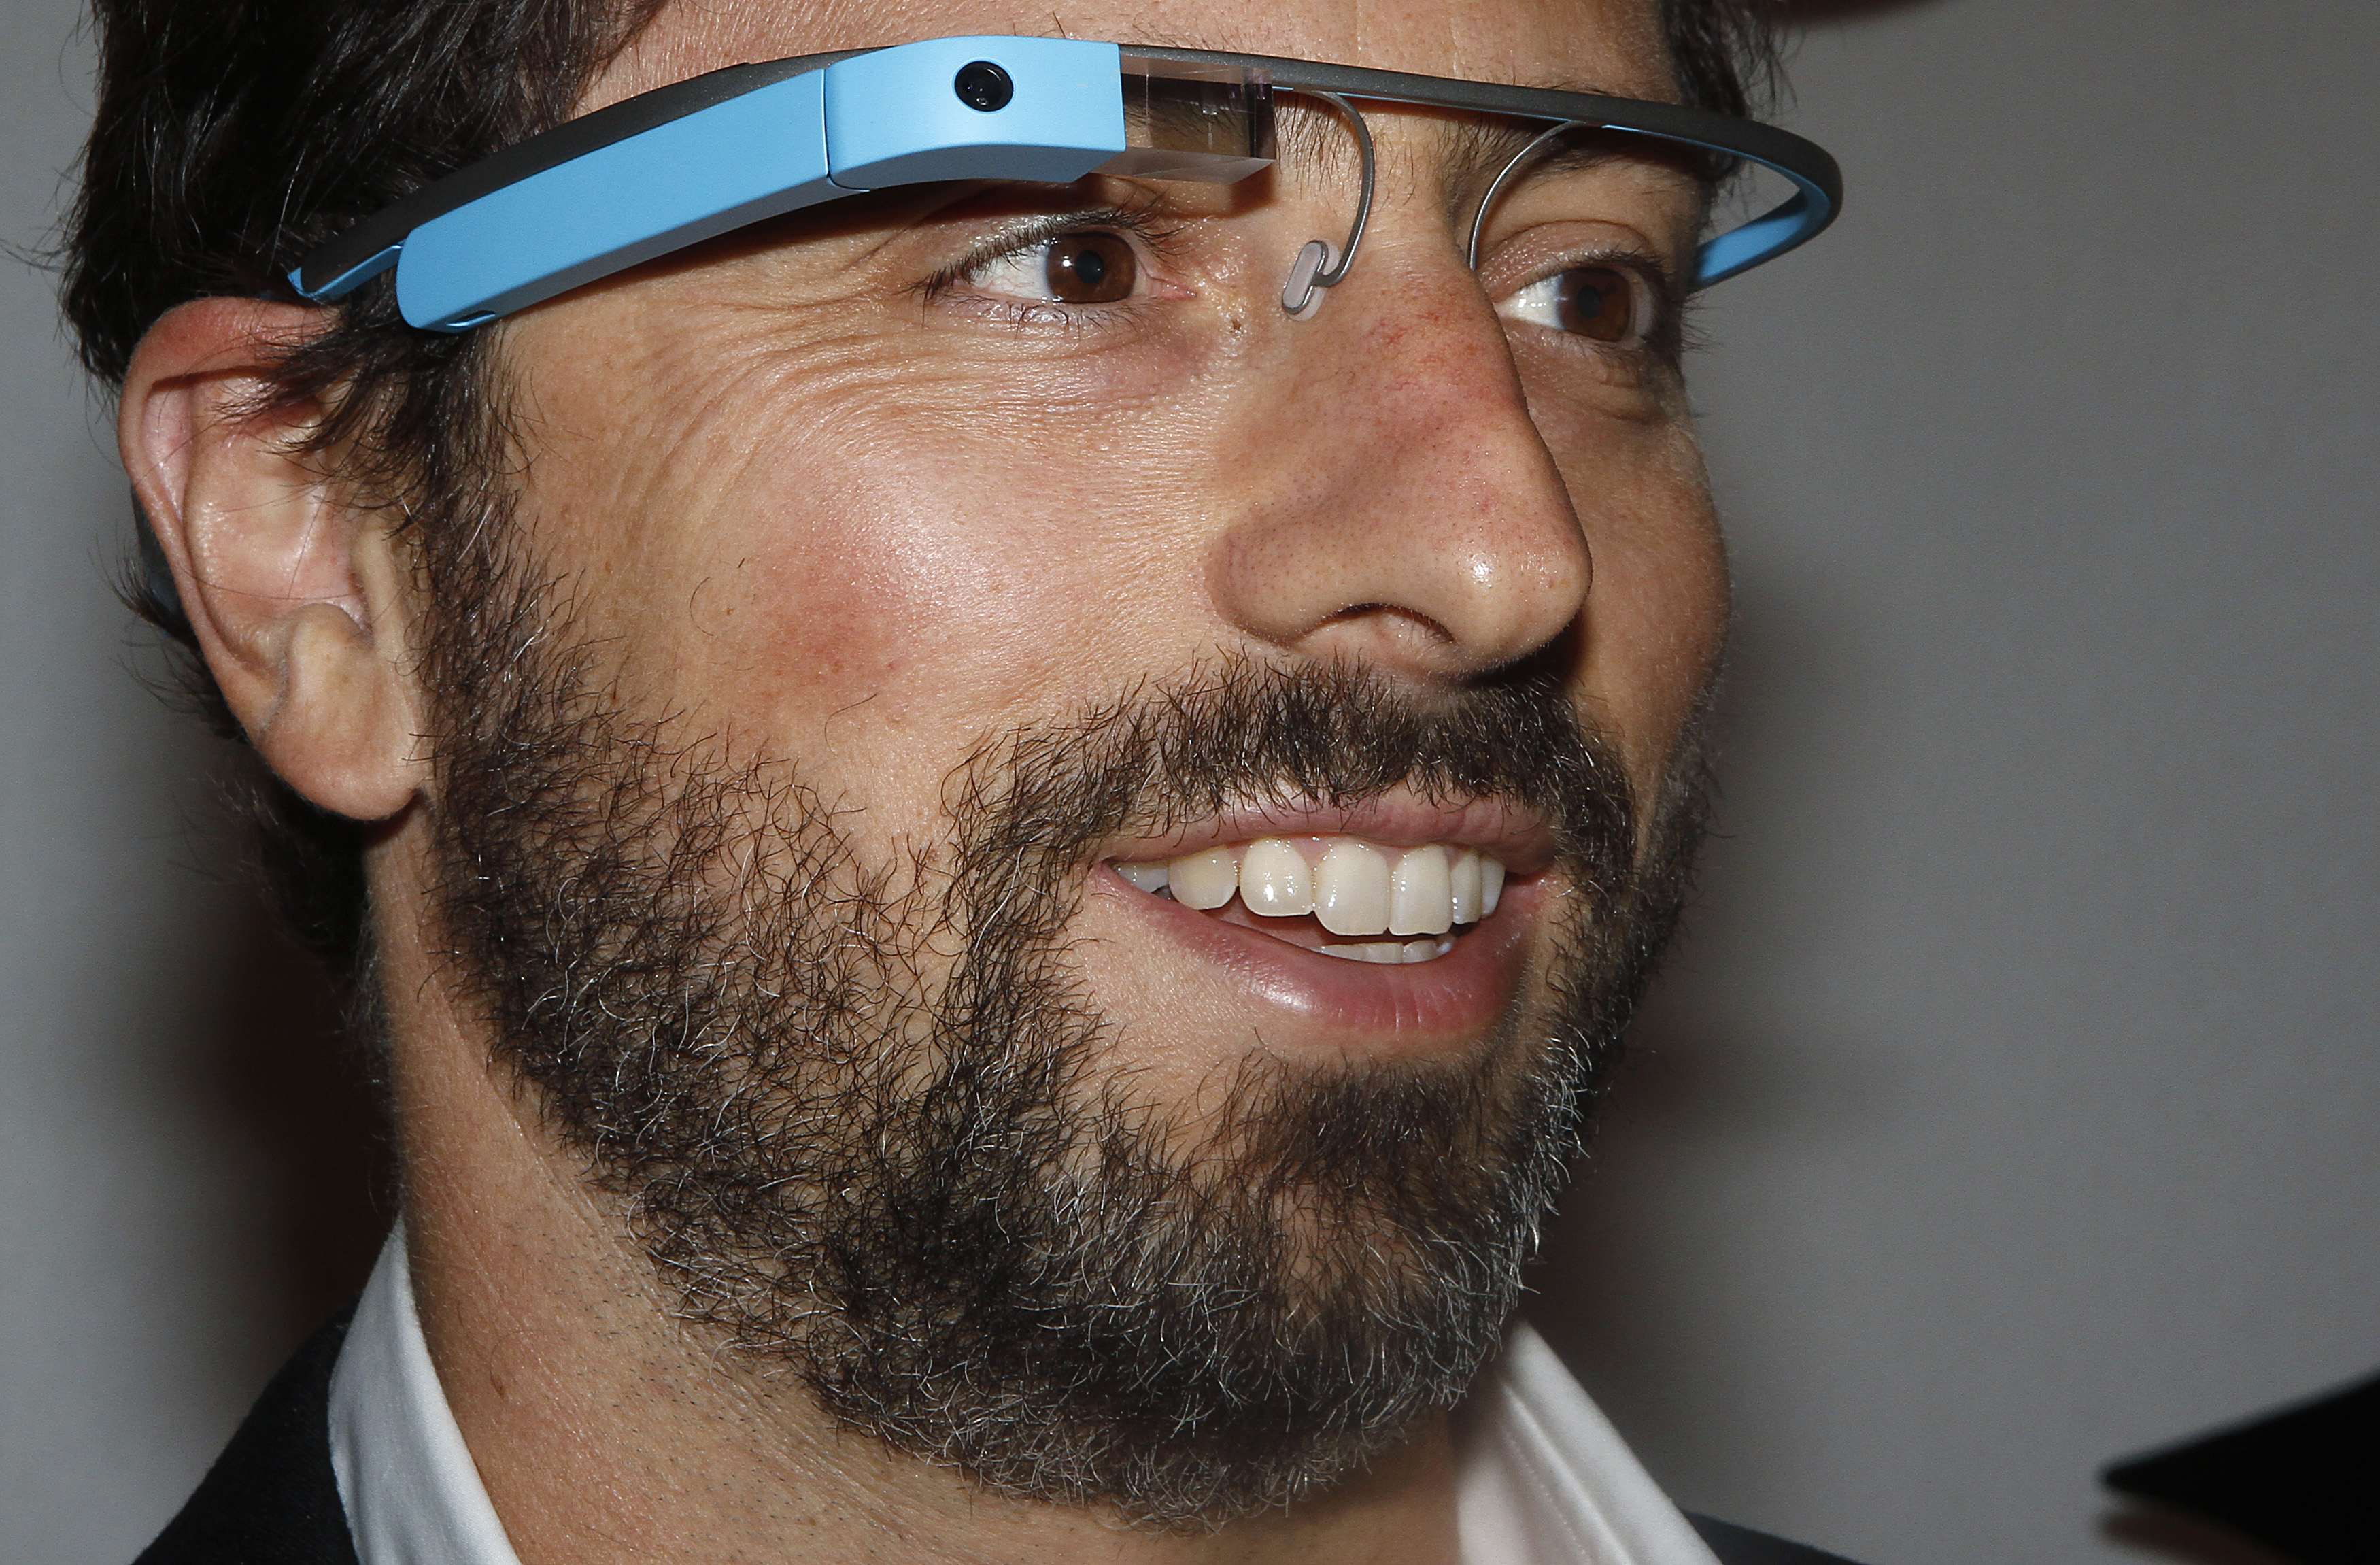 Google founder Sergey Brin poses for a portrait wearing Google Glass glasses before the Diane von Furstenberg  Spring/Summer 2013 collection show during New York Fashion Week